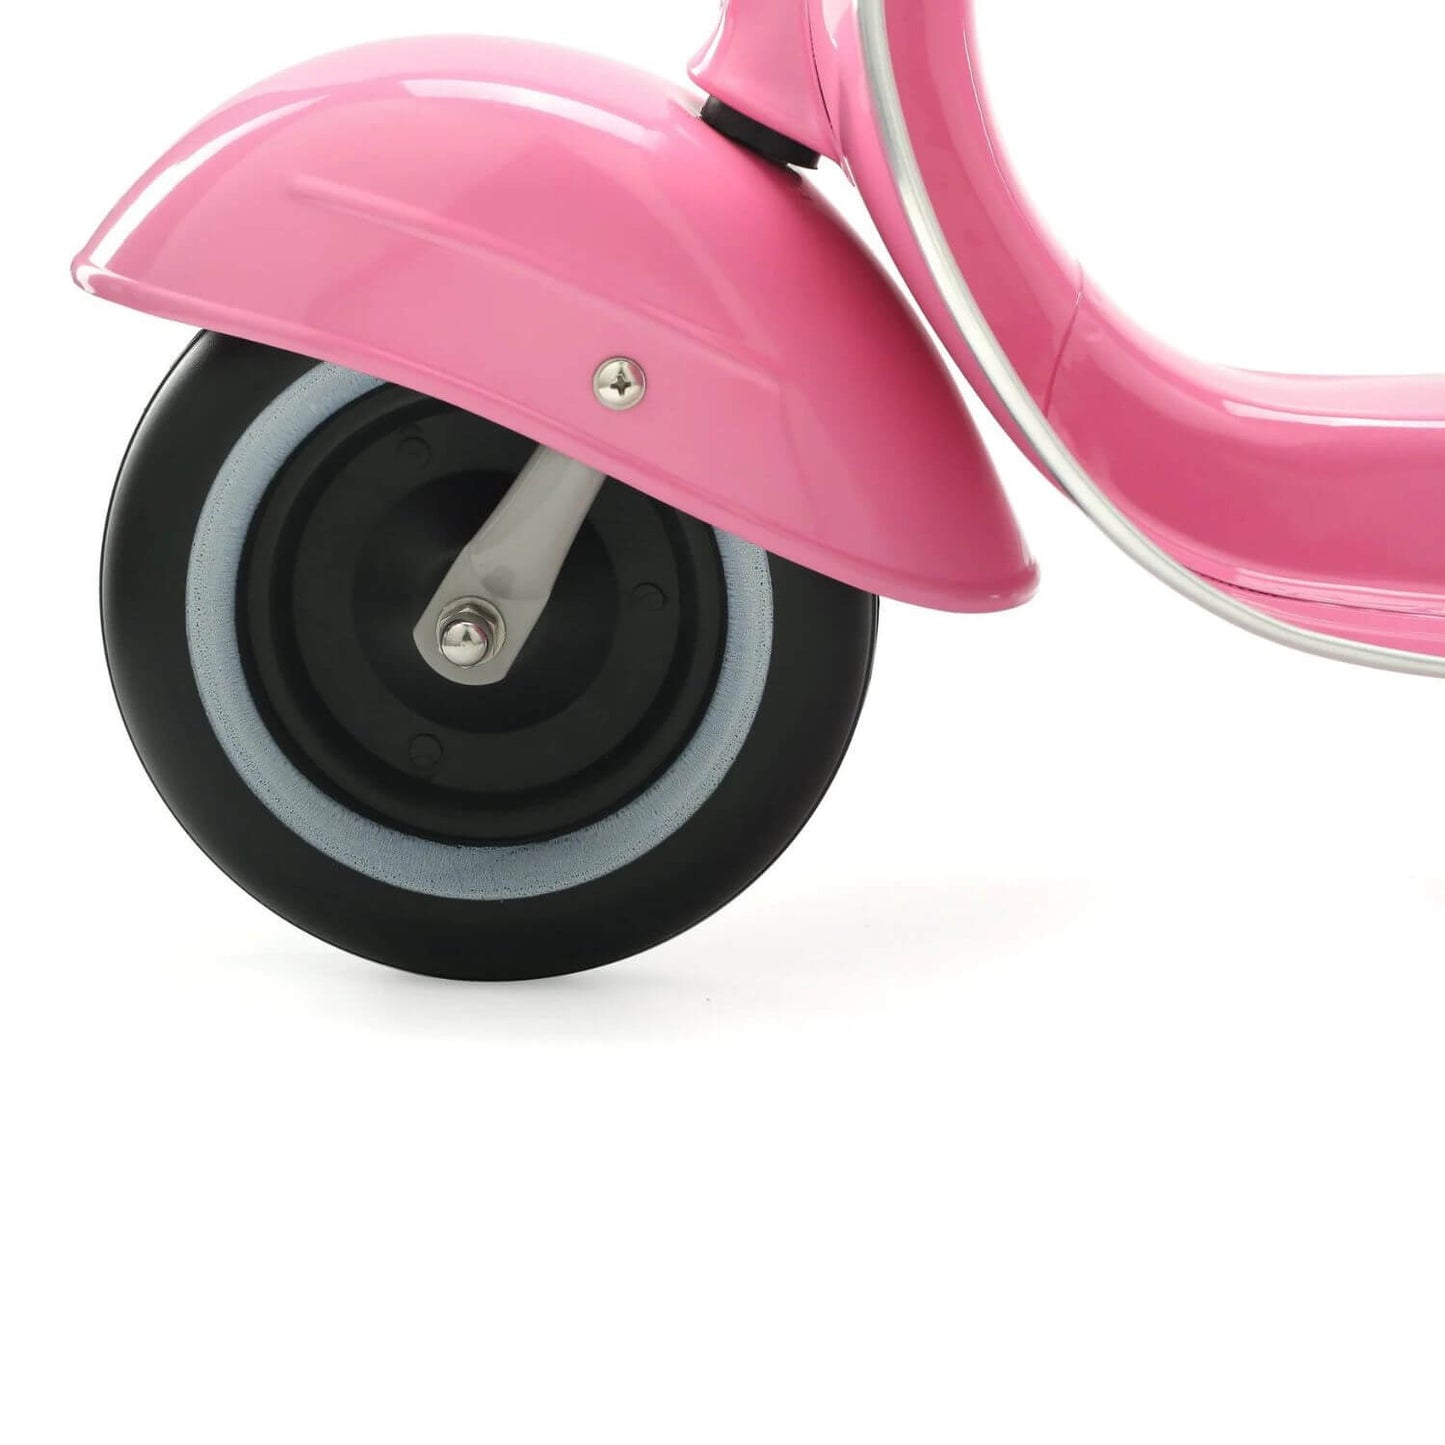 Primo Basic Ride-On with Plastic Seat Pink - Detail